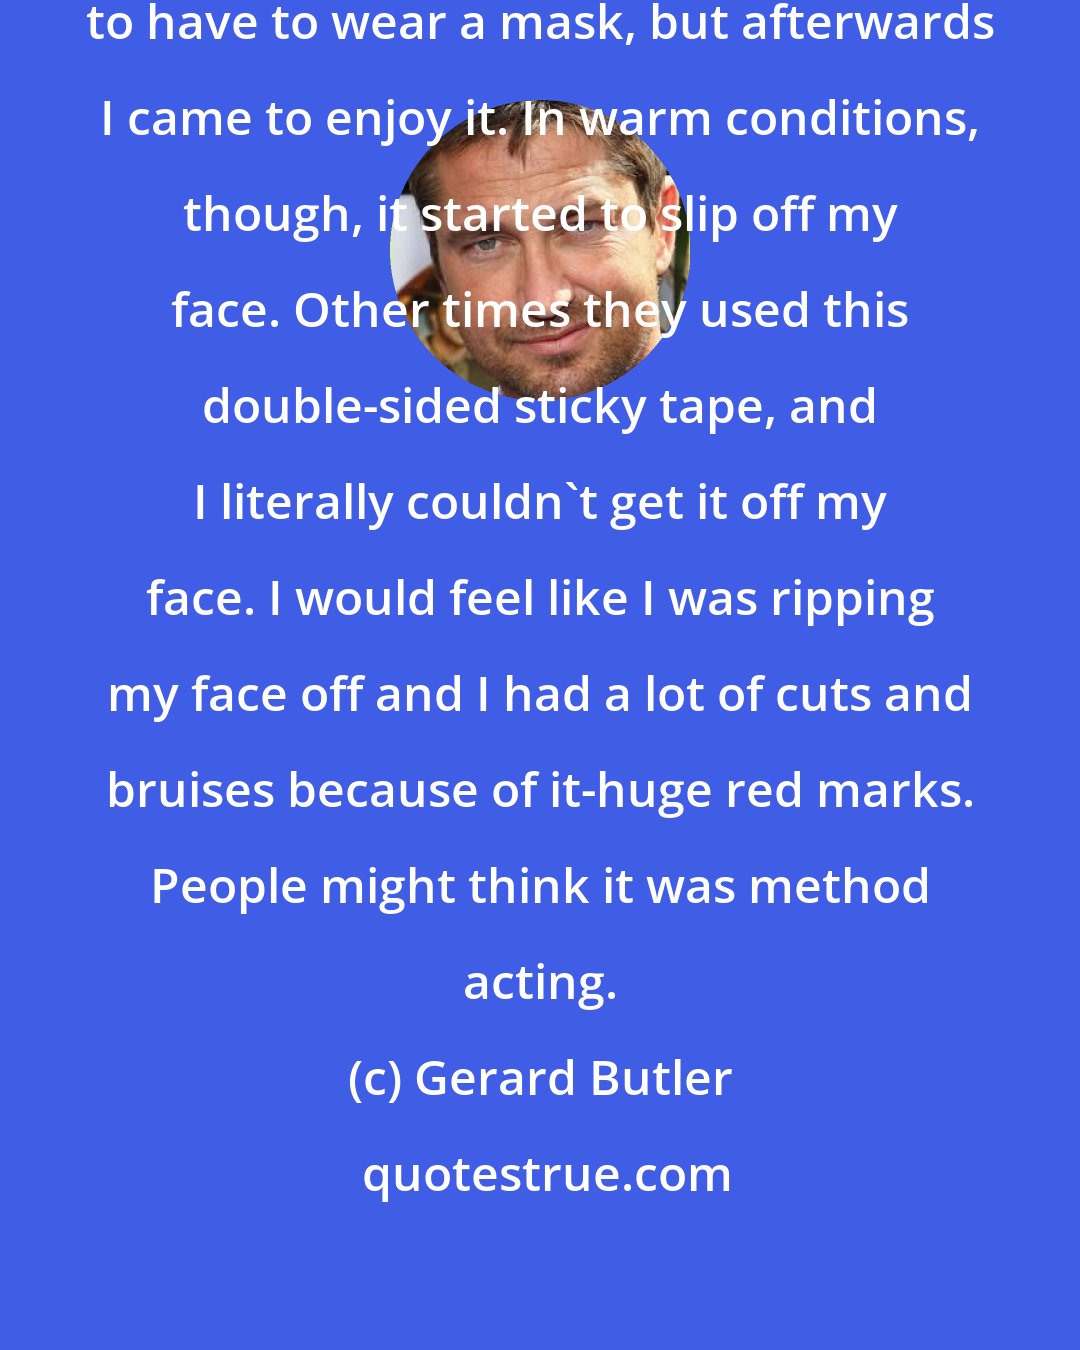 Gerard Butler: At first it was a bit strange and daunting to have to wear a mask, but afterwards I came to enjoy it. In warm conditions, though, it started to slip off my face. Other times they used this double-sided sticky tape, and I literally couldn't get it off my face. I would feel like I was ripping my face off and I had a lot of cuts and bruises because of it-huge red marks. People might think it was method acting.